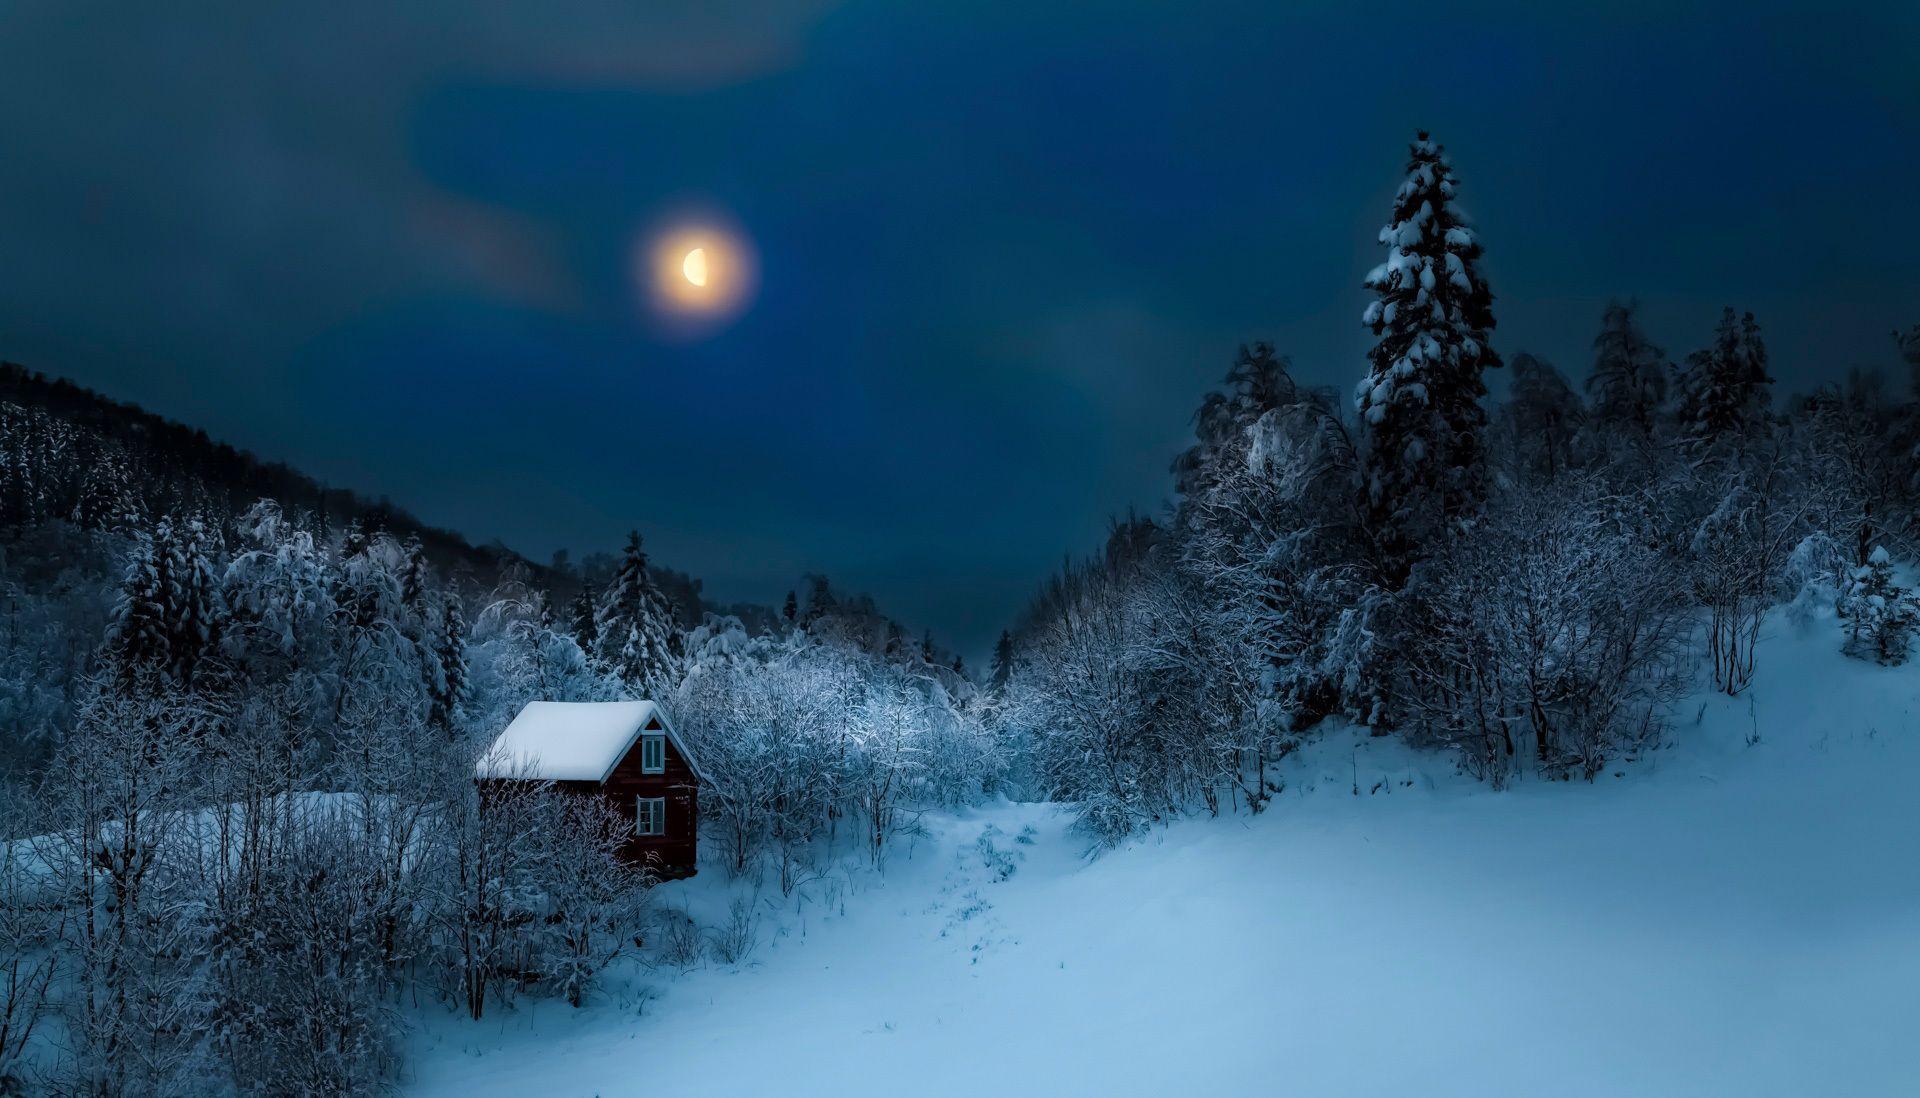 Download wallpaper 1920x1098 building, winter, snow, night, forest